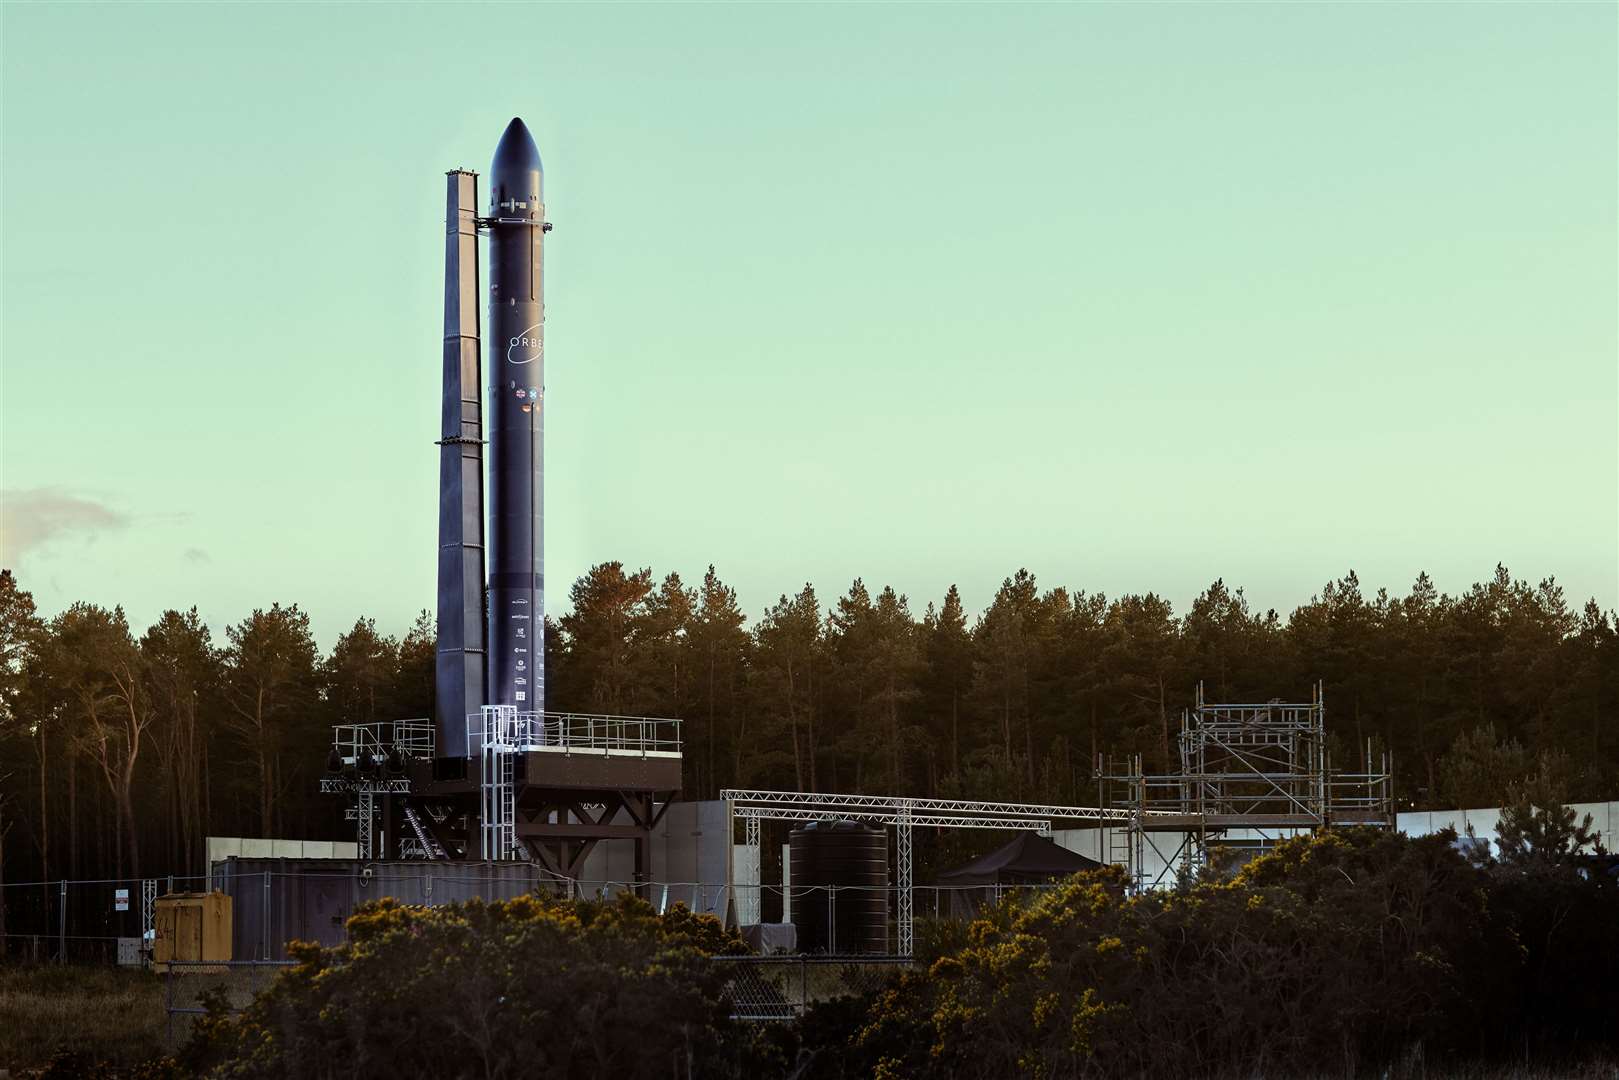 Orbex is currently conducting tests on its Prime rocket, seen here at Kinloss.